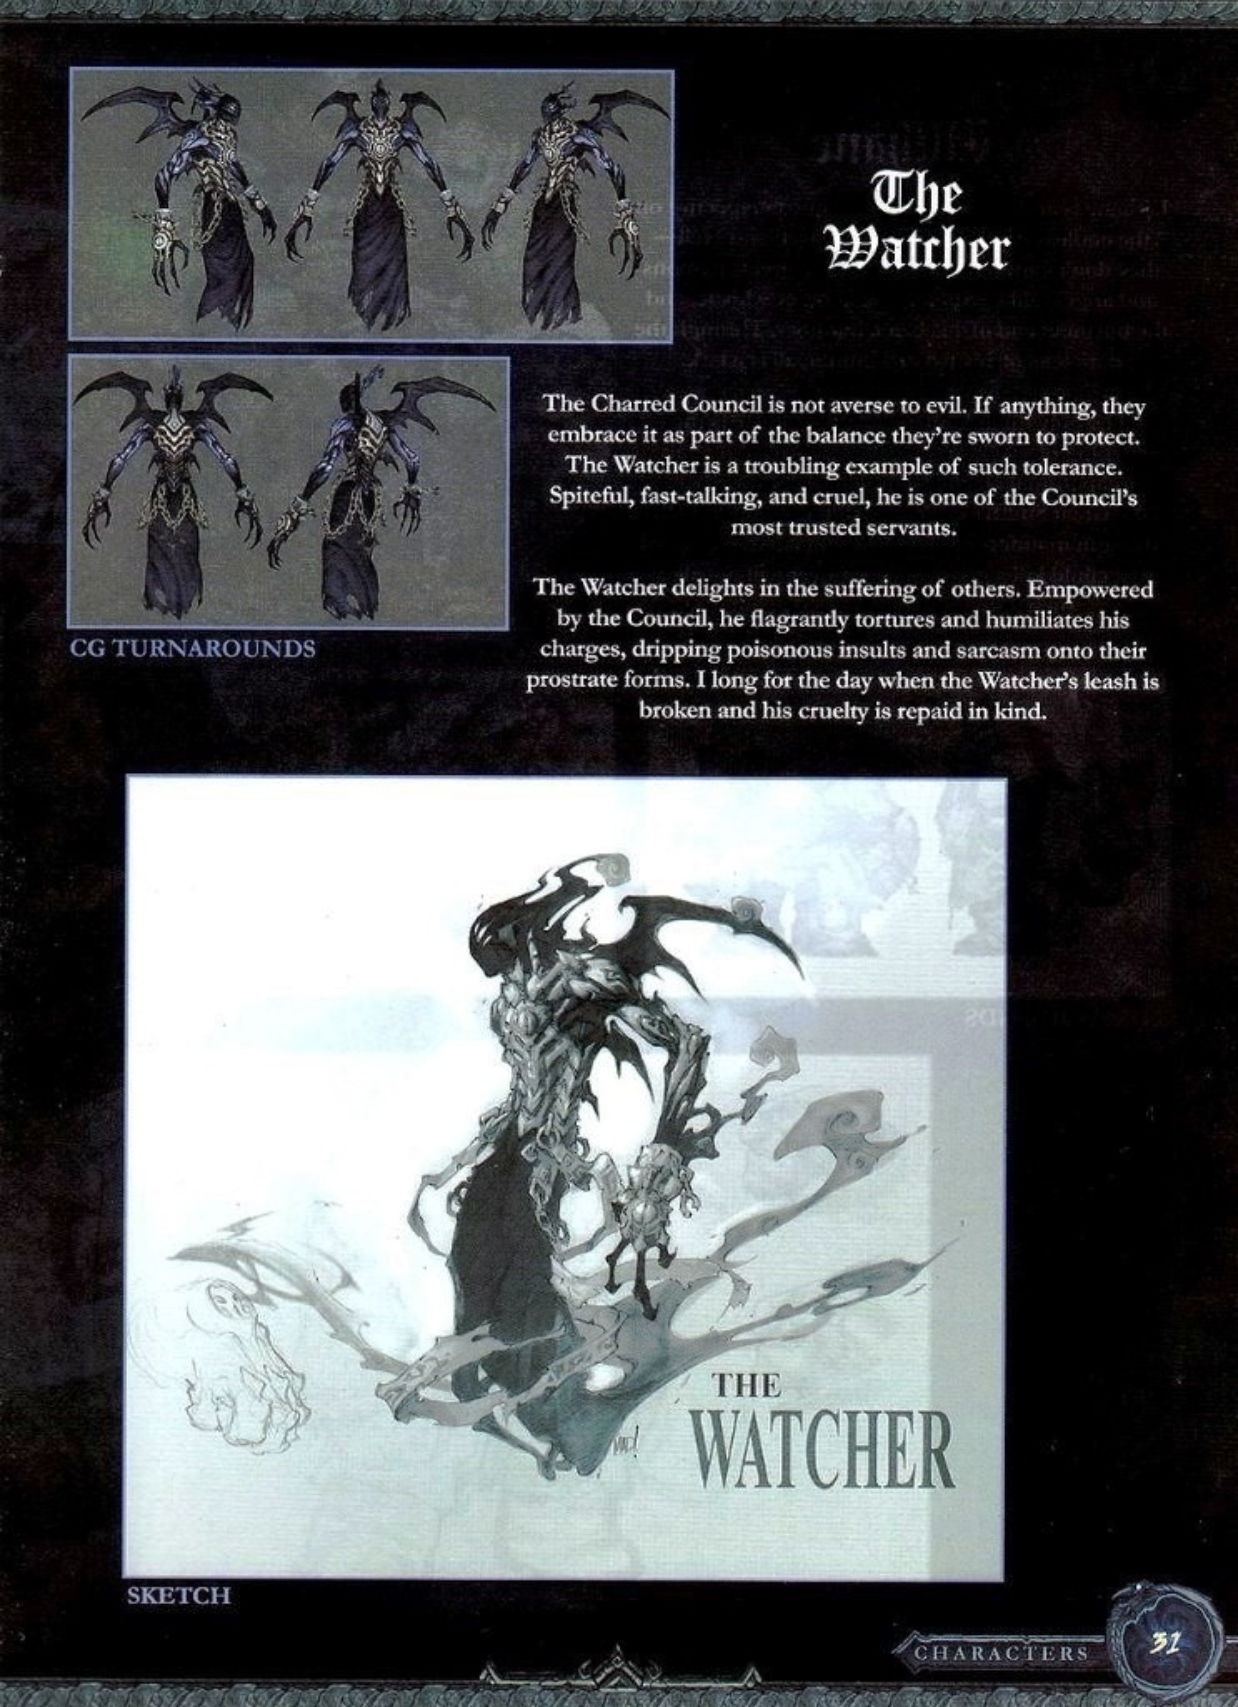 The Art of Darksiders (low-res, missing pages, and watermarked) 30